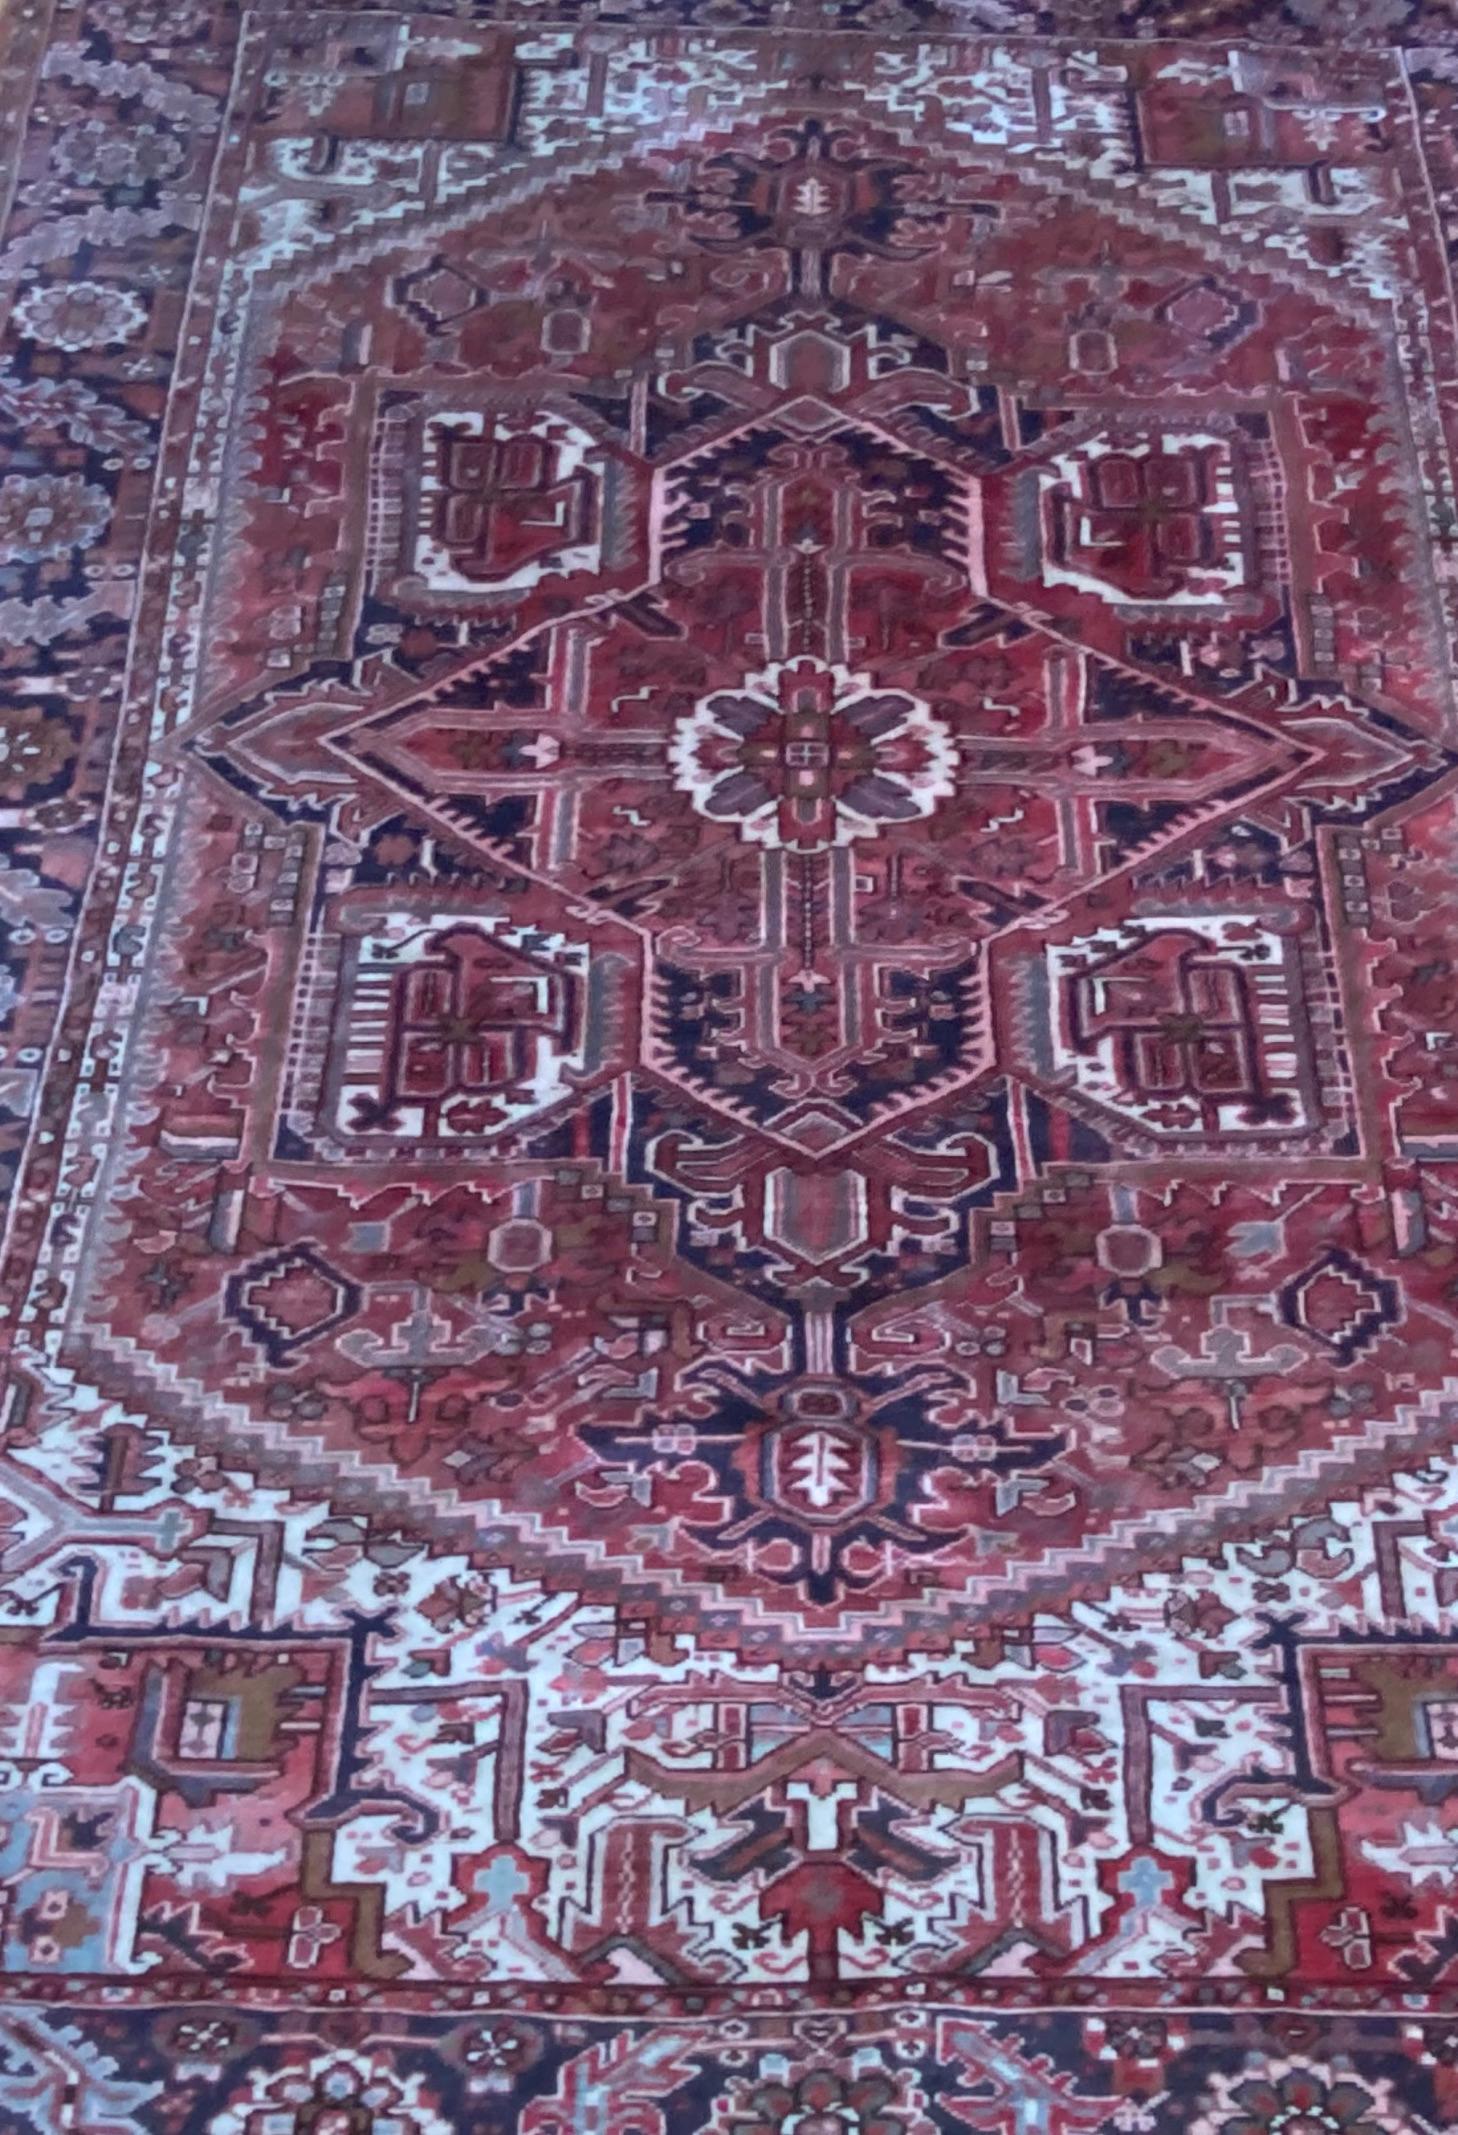 Late 19th to early 20th century Persian rug

Gorgeous antique Persian rug in a rich oxblood red color with dark blues and whites

The rug measures 8 feet 6 inches wide x 11 feet 2 inches long

We are unsure of the materials used

The rug is